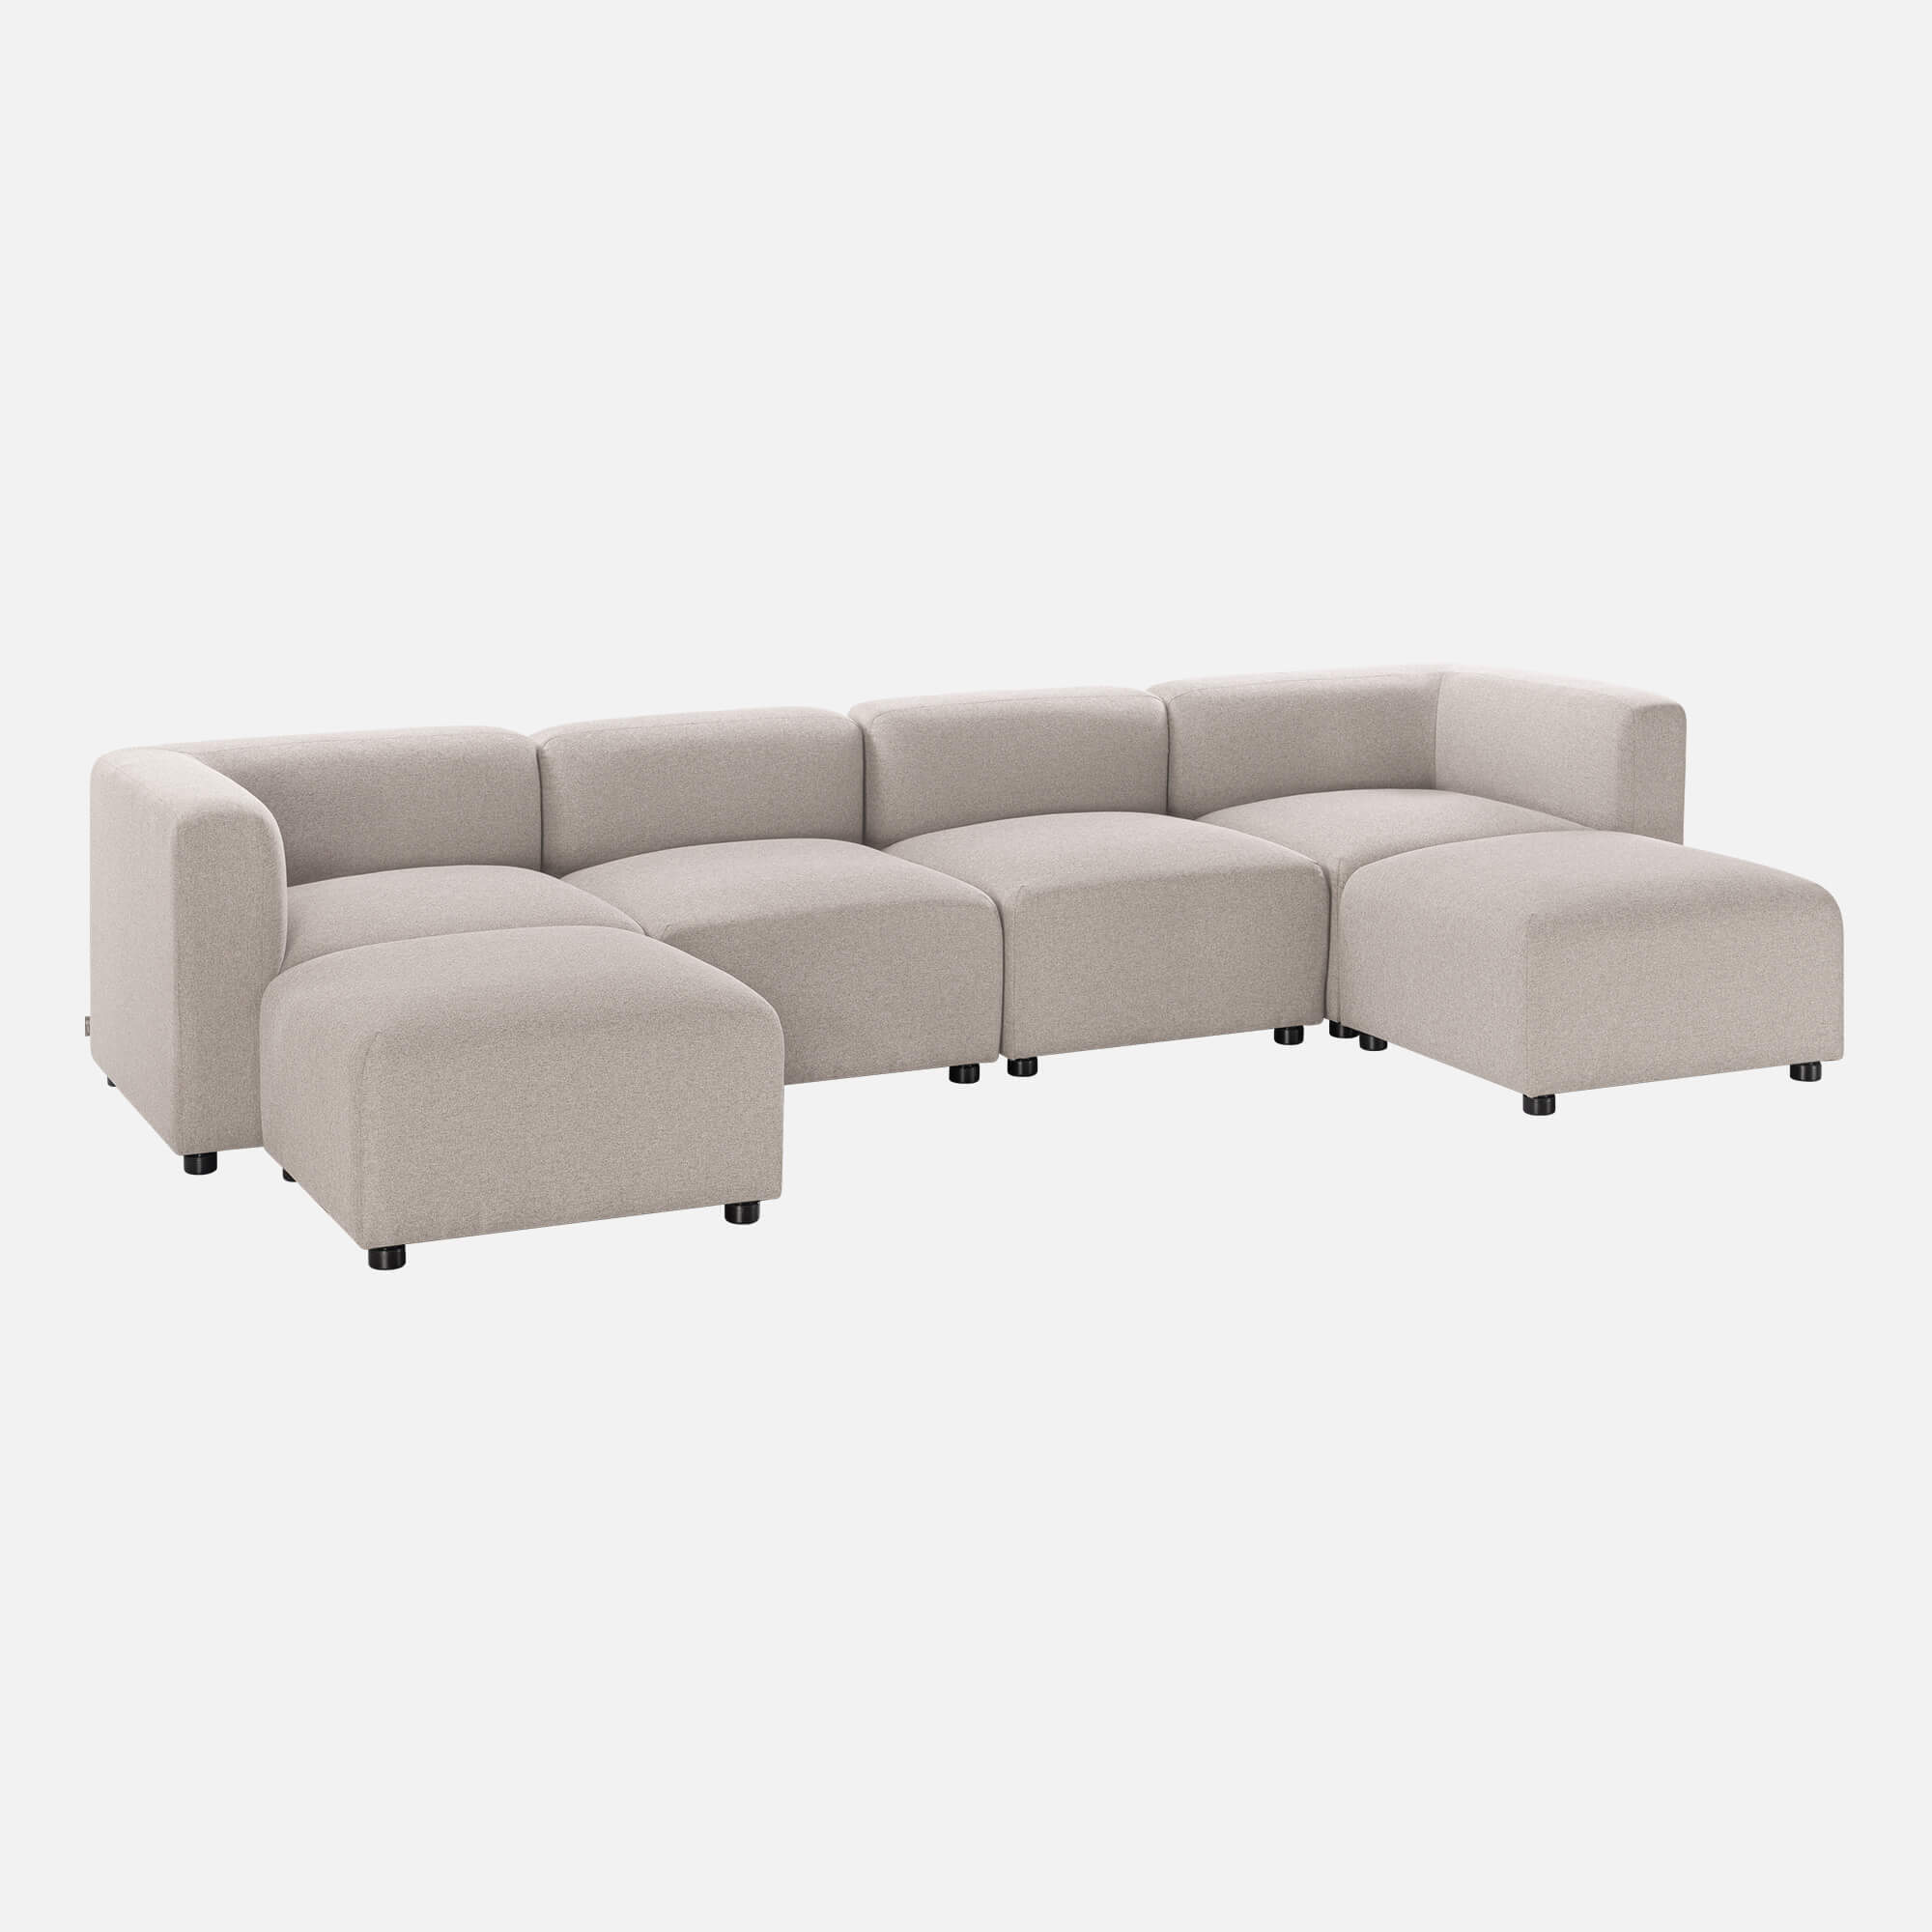 Luca Double Chaise Sectional Sofa with multiple ottomans for versatile arrangement